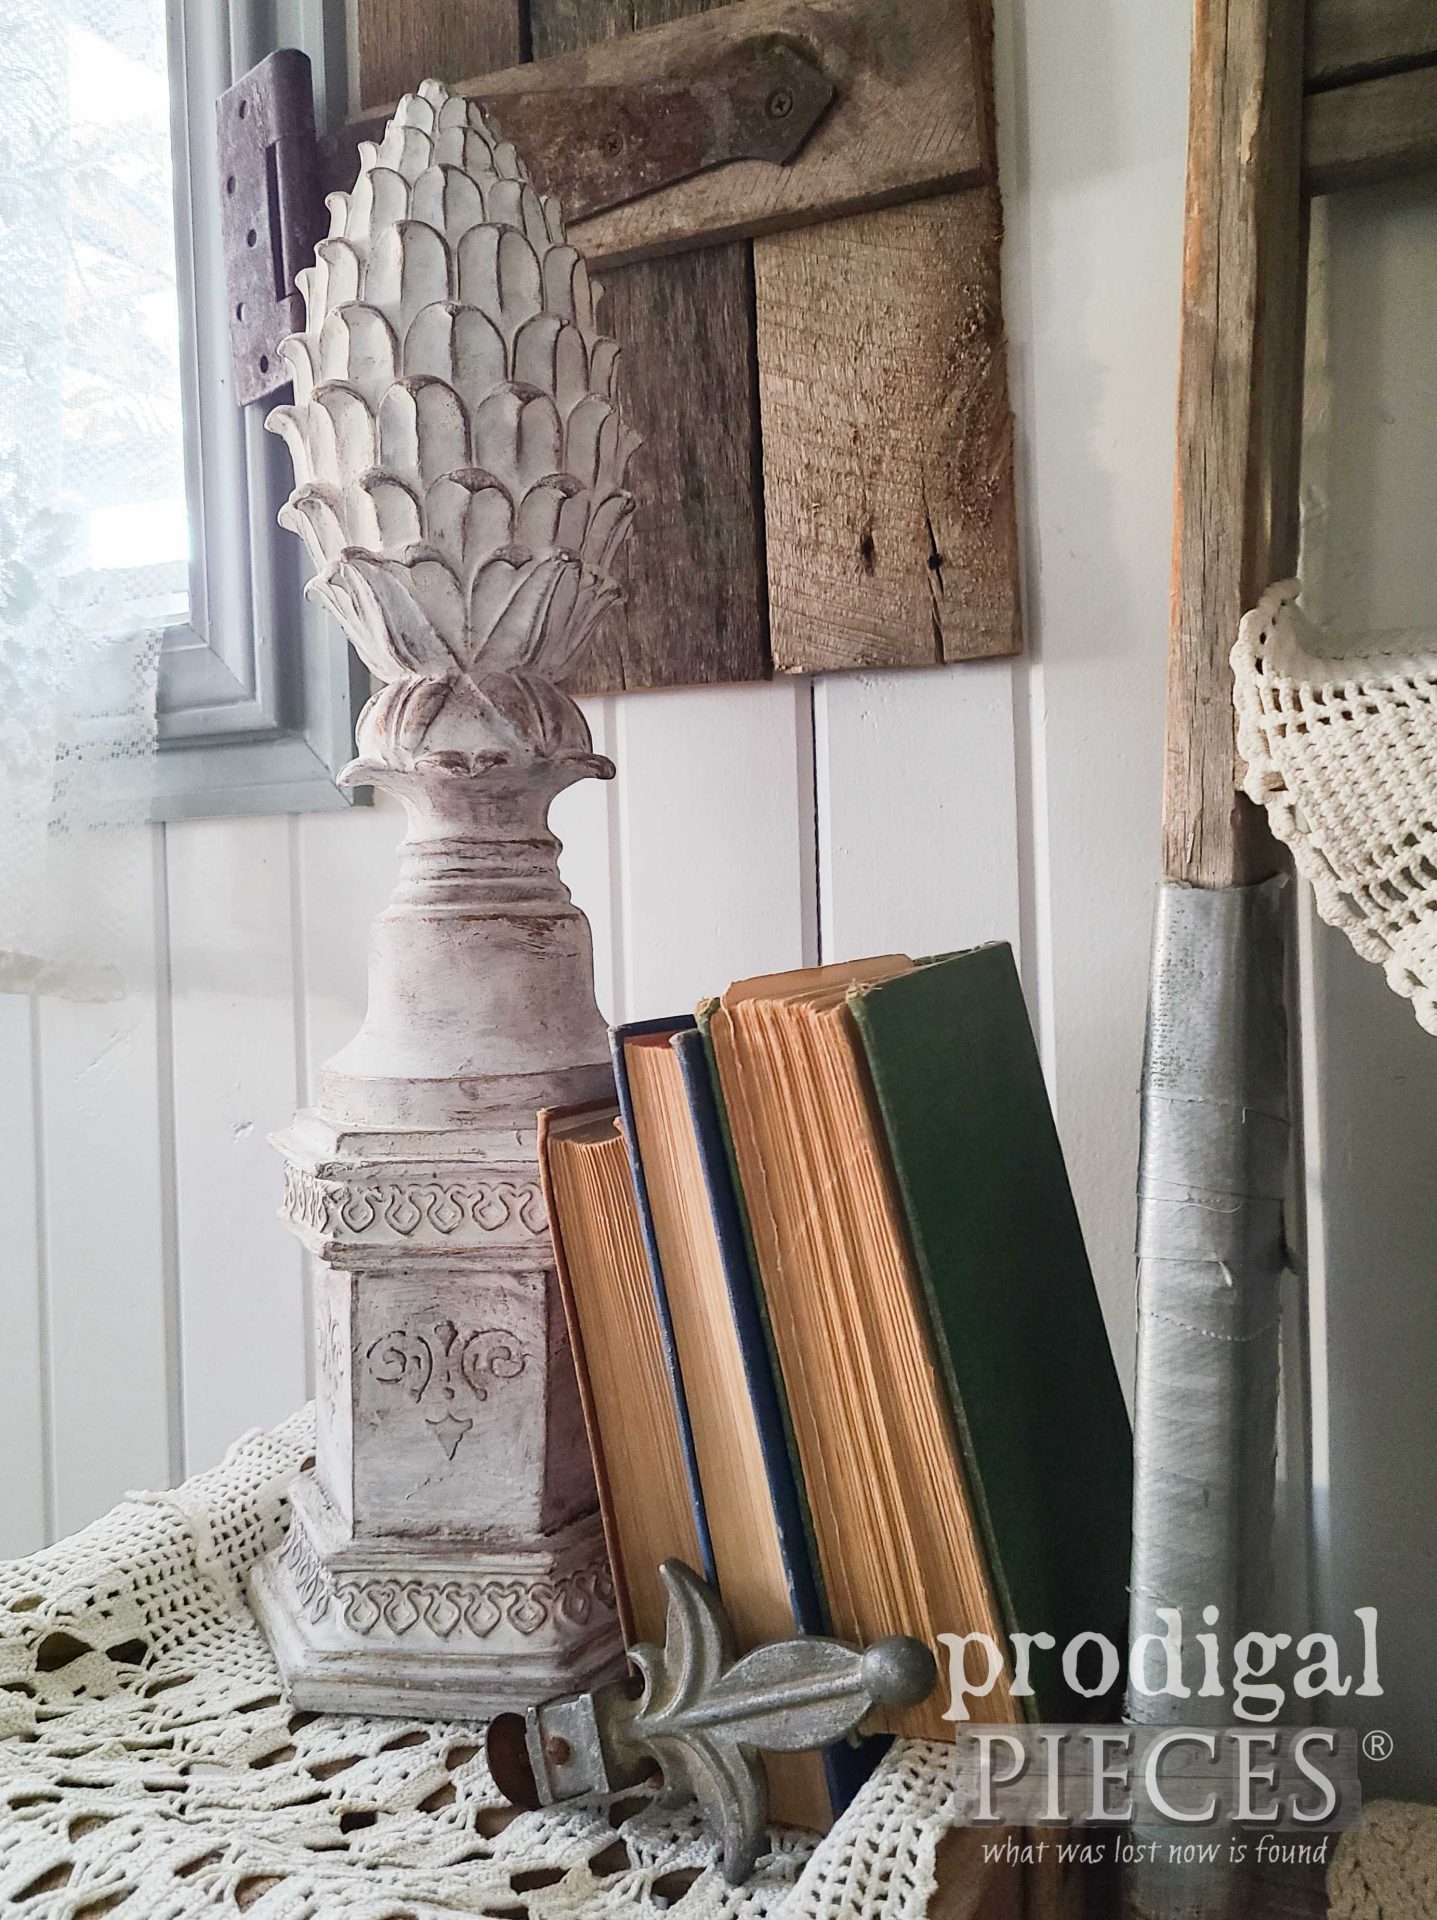 DIY Farmhouse Chic Style from Broken Decor by Larissa of Prodigal Pieces | prodigalpieces.com #prodigalpieces #homedecor #farmhouse #decor